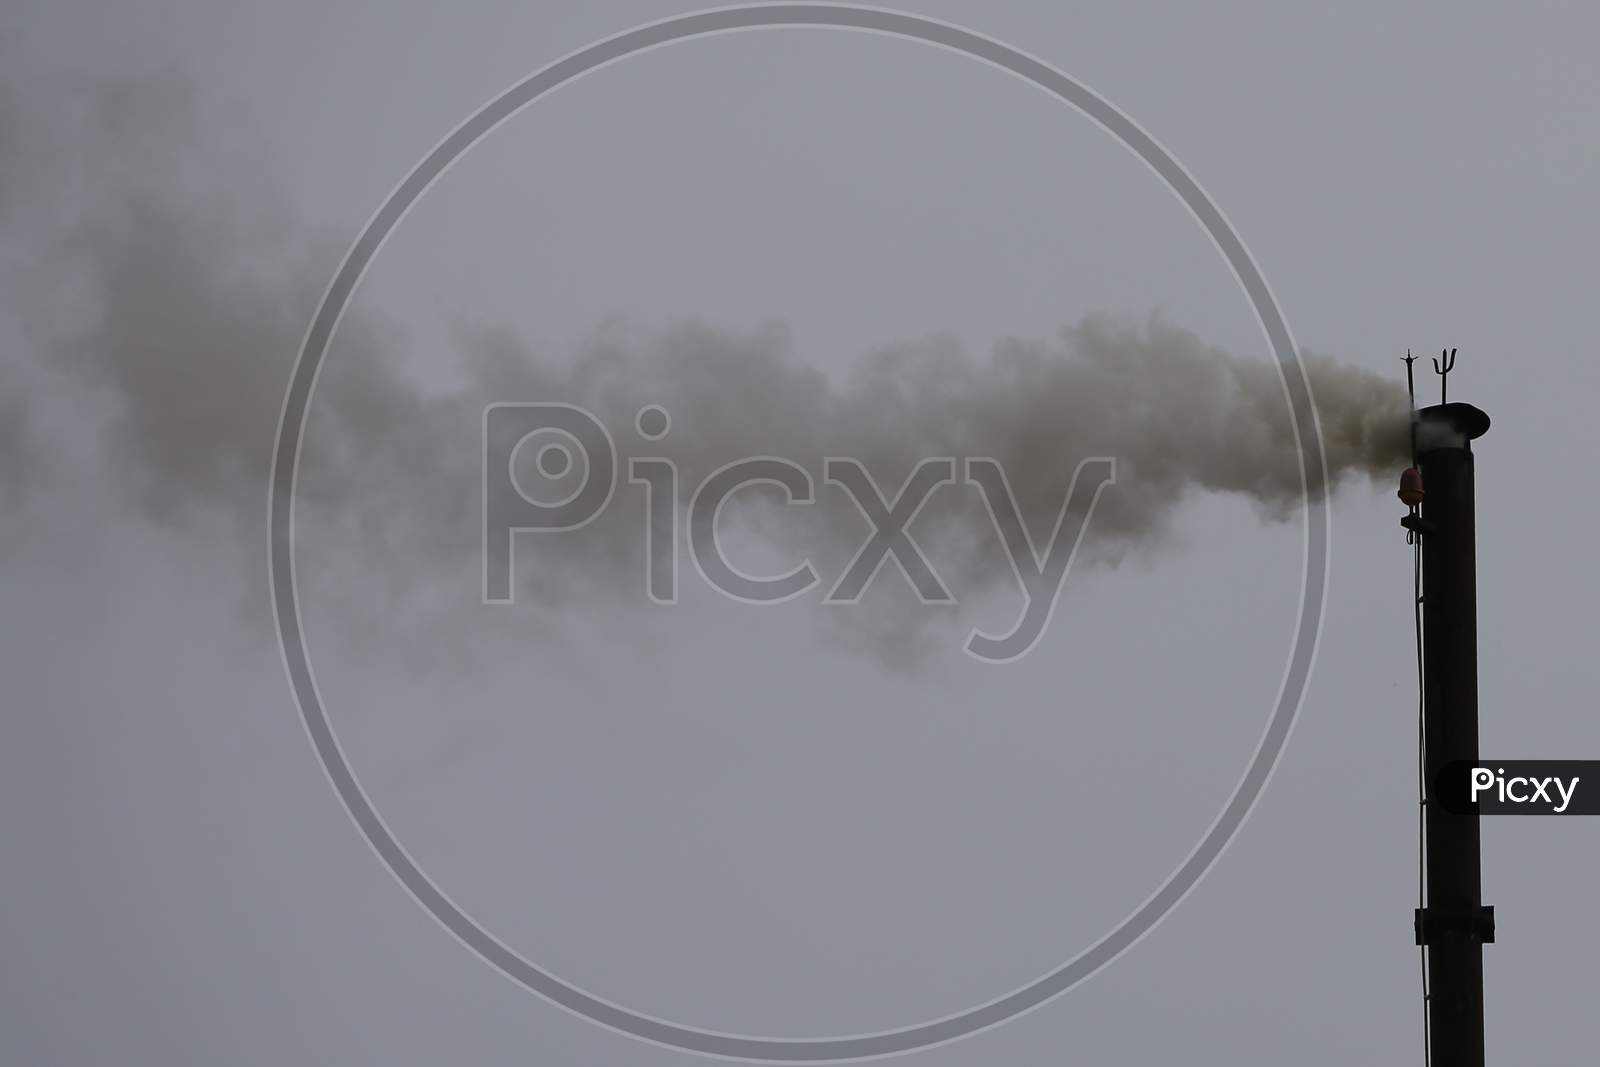 A chimney belonging to a crematorium emits smokes during the cremation of people who died due to coronavirus infection in Ajmer, Rajasthan on July 19, 2020